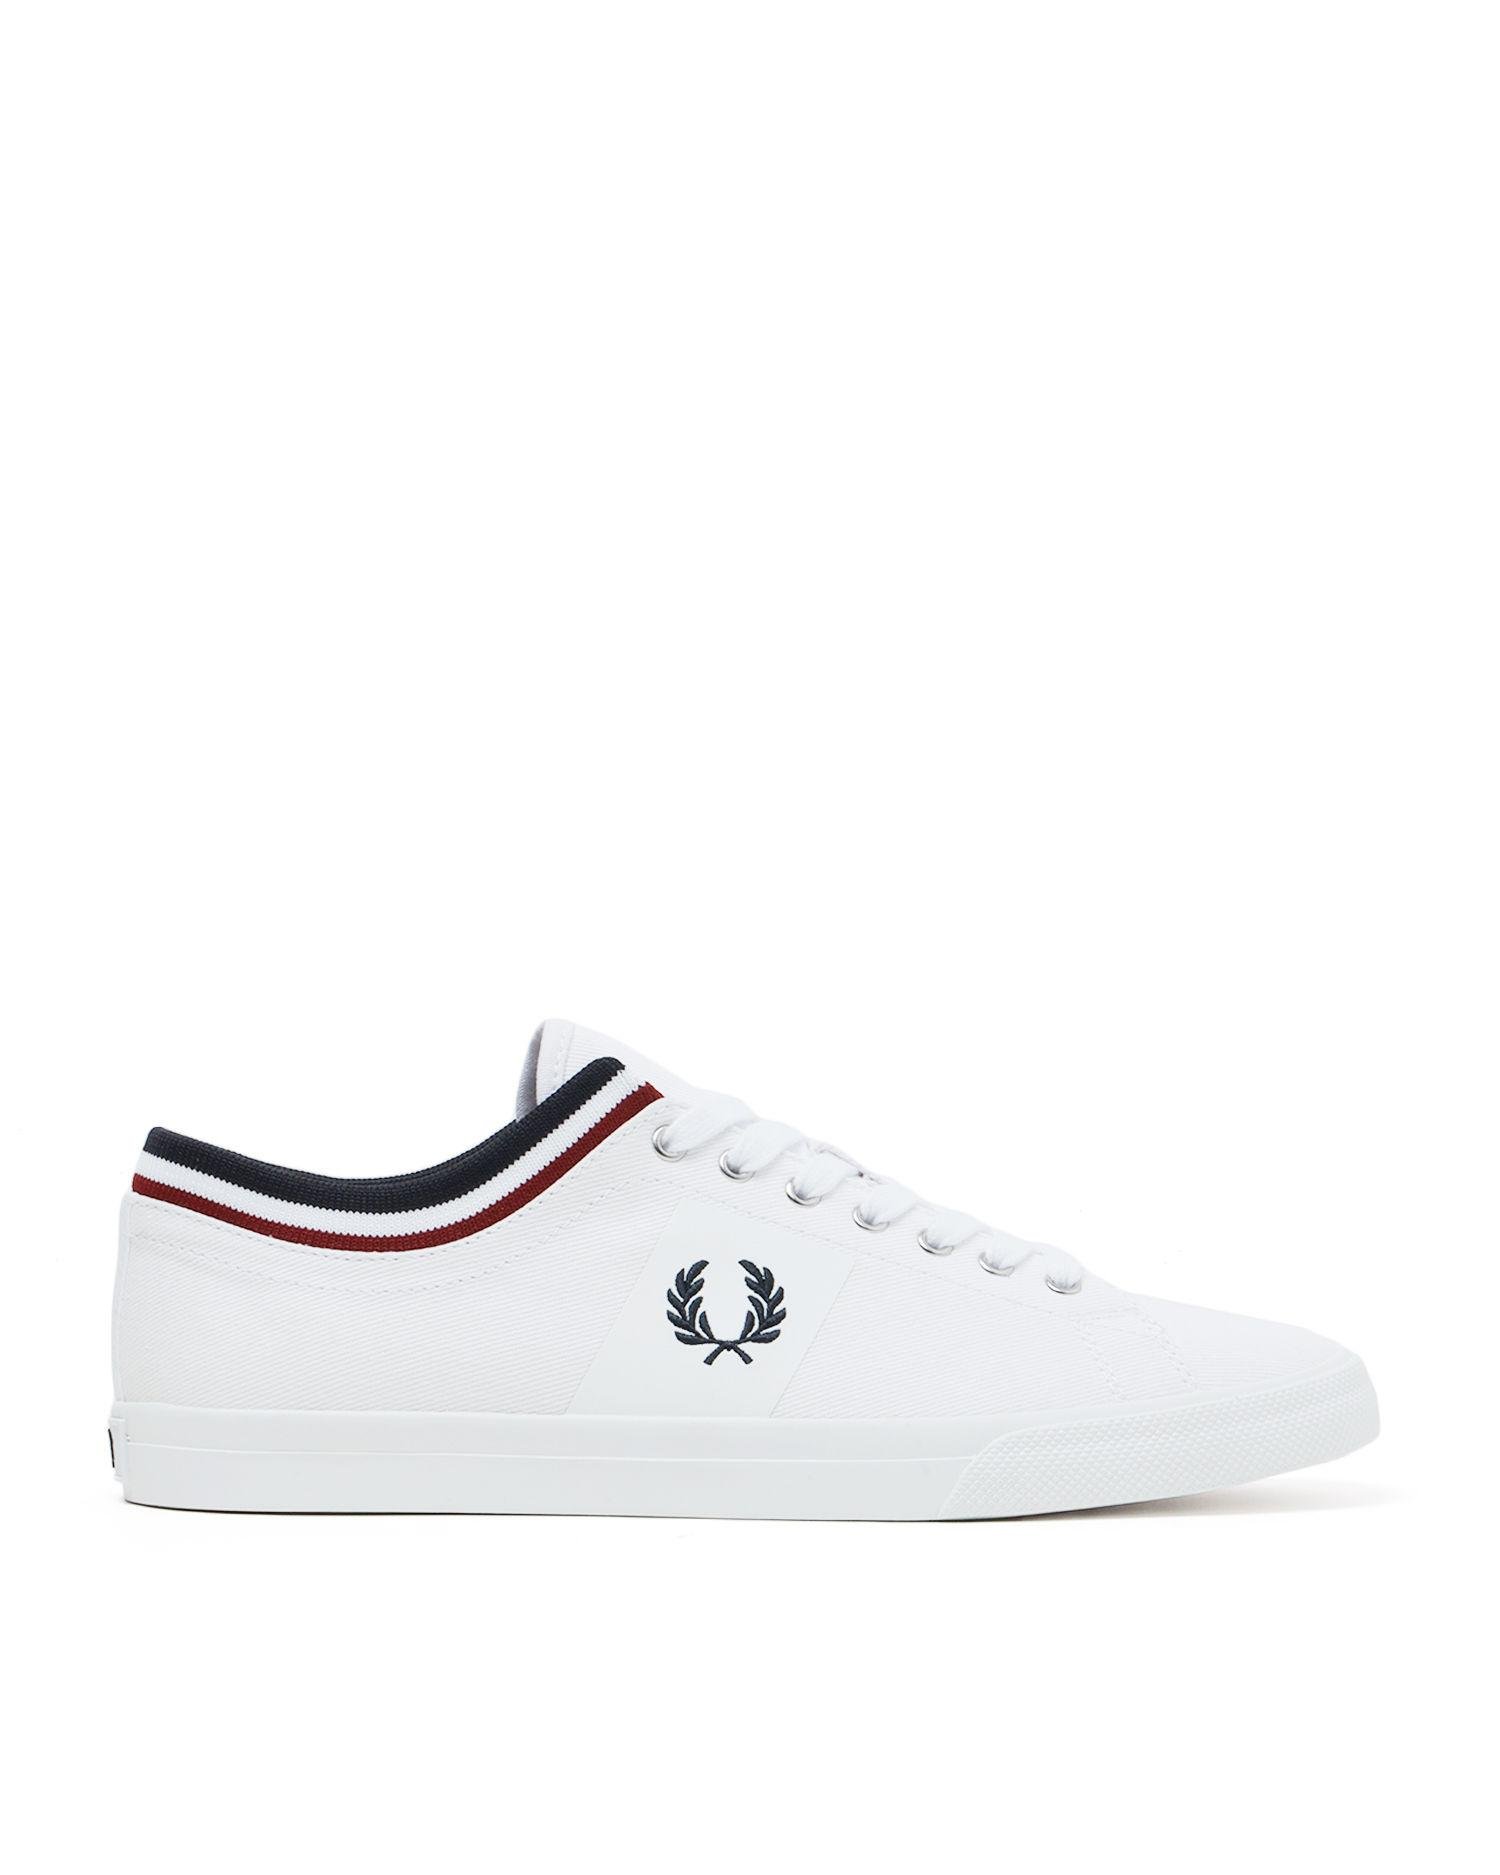 Underspin tipped cuff twill trainers by FRED PERRY | jellibeans